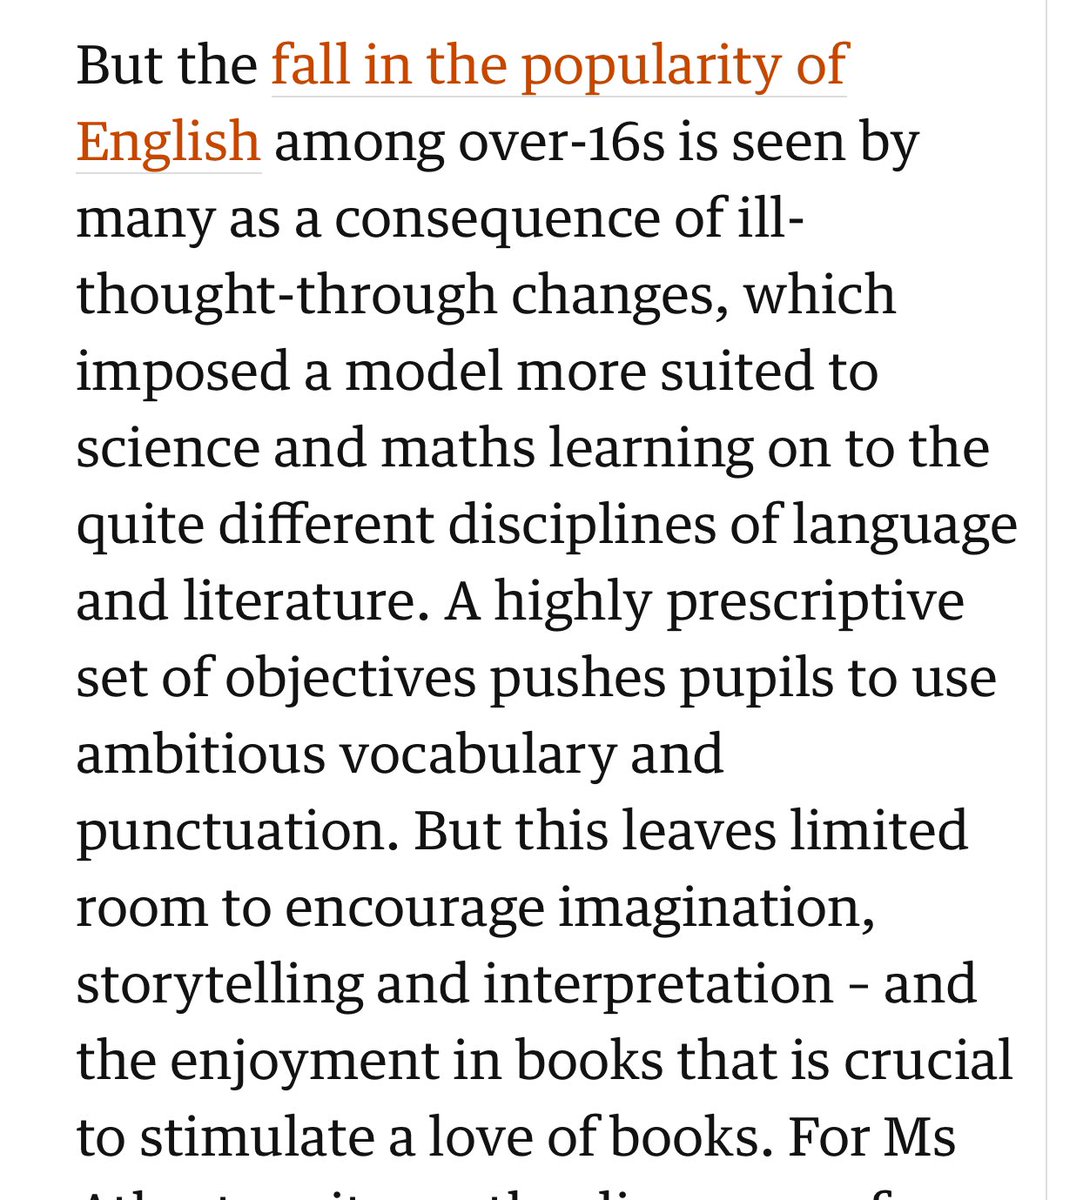 Calls for major reform of the subject of English Plunging popularity of English led by curriculum and teaching approaches more akin to science or maths. theguardian.com/commentisfree/…